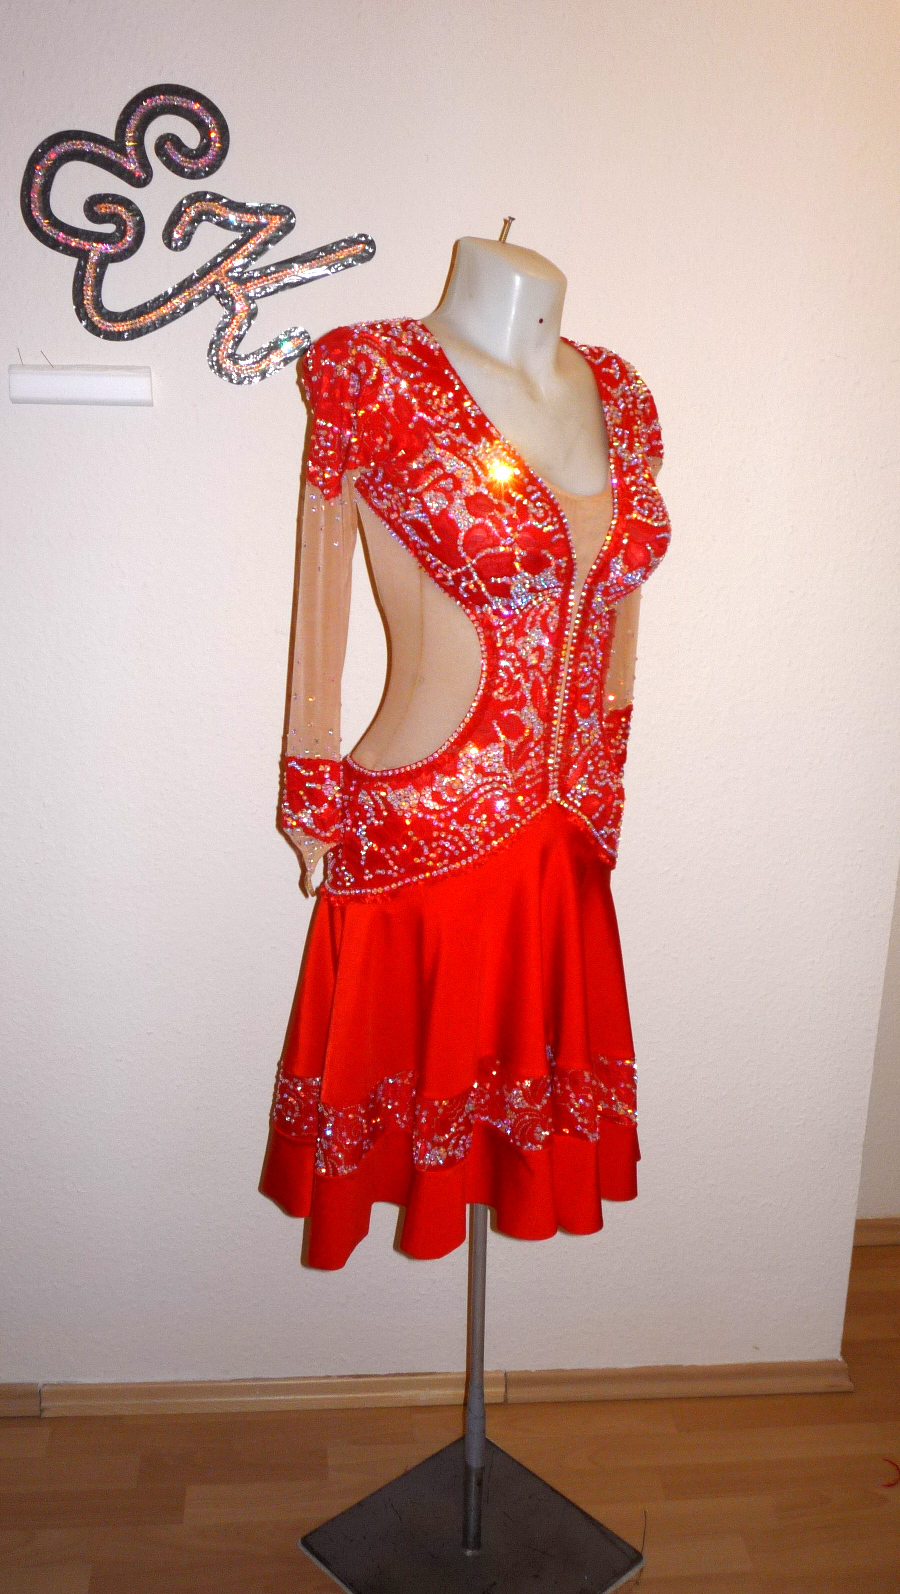 M707 Red Latin Dance Costume for sale - Dreamgown